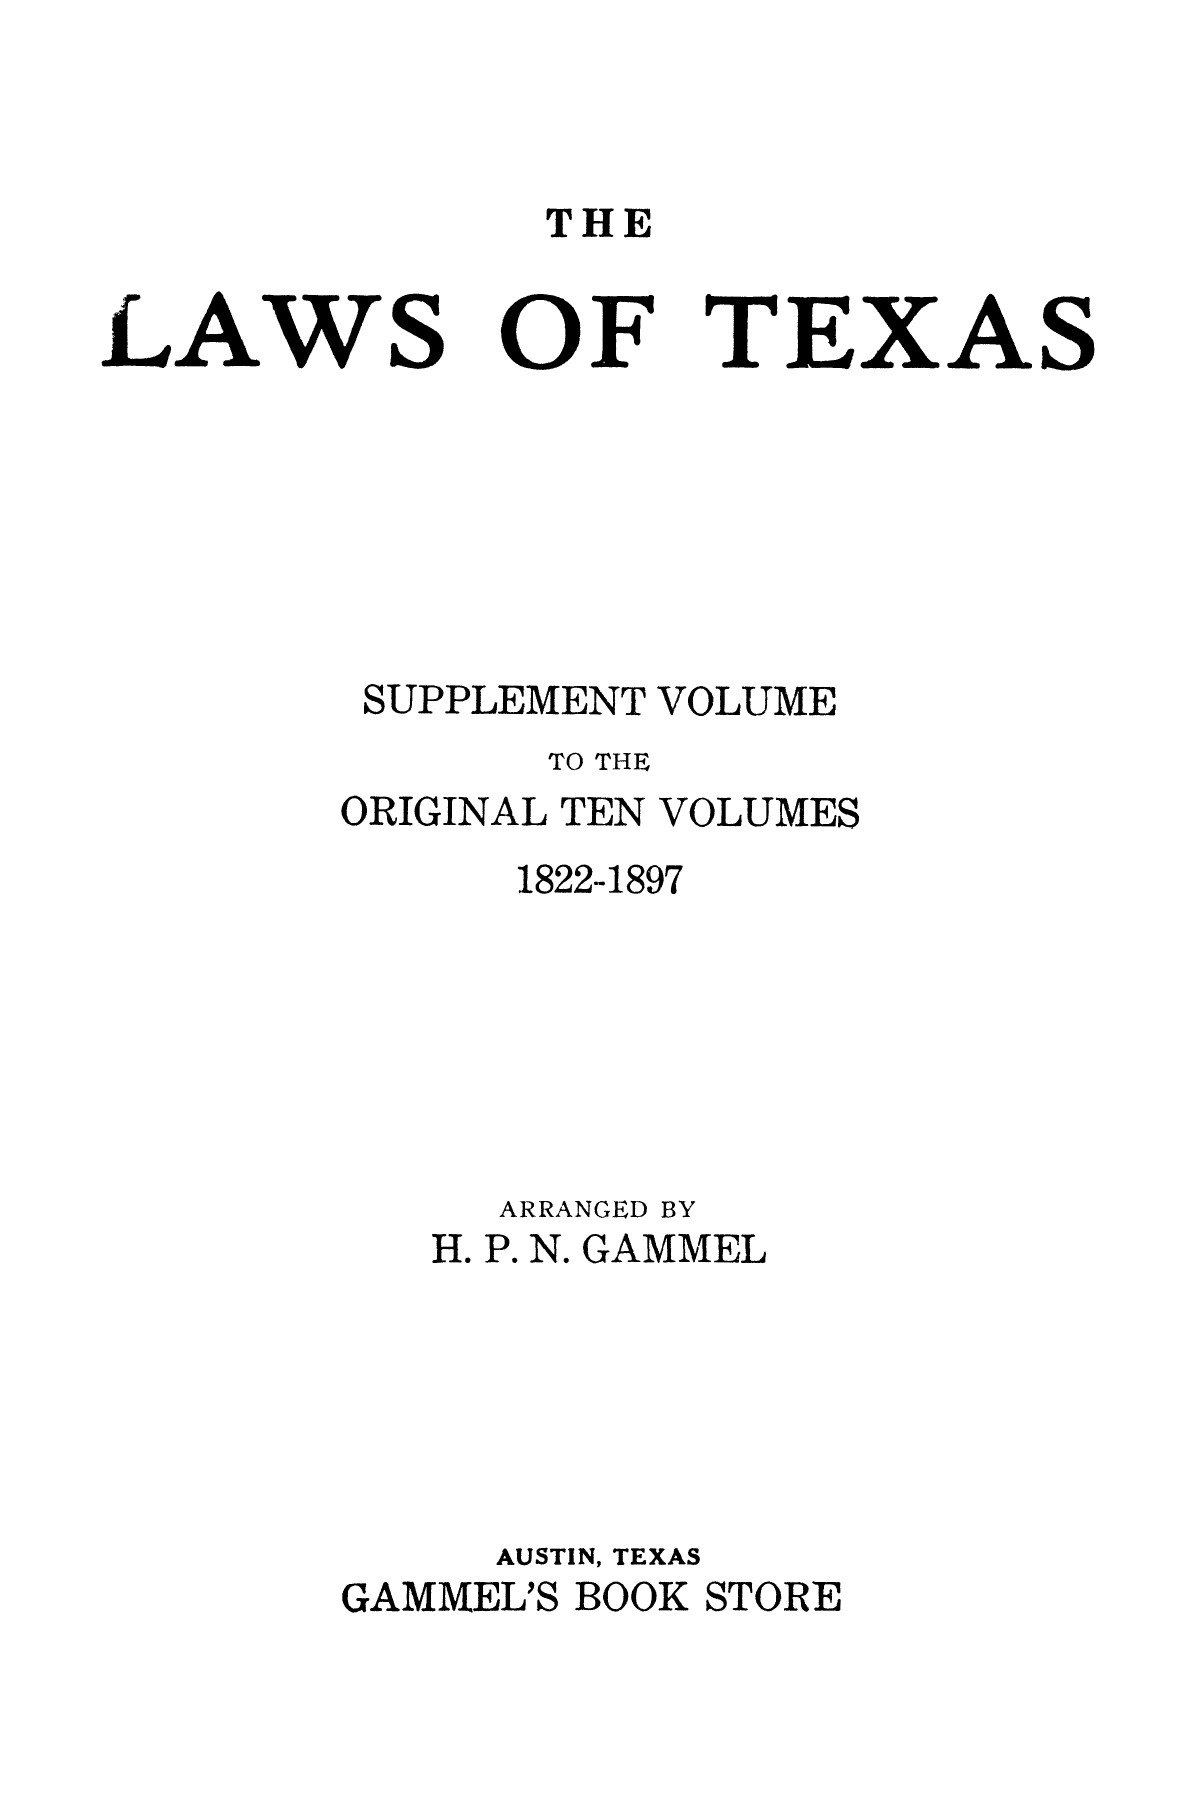 The Laws of Texas, 1929-1931 [Volume 27]
                                                
                                                    [Sequence #]: 1 of 1943
                                                